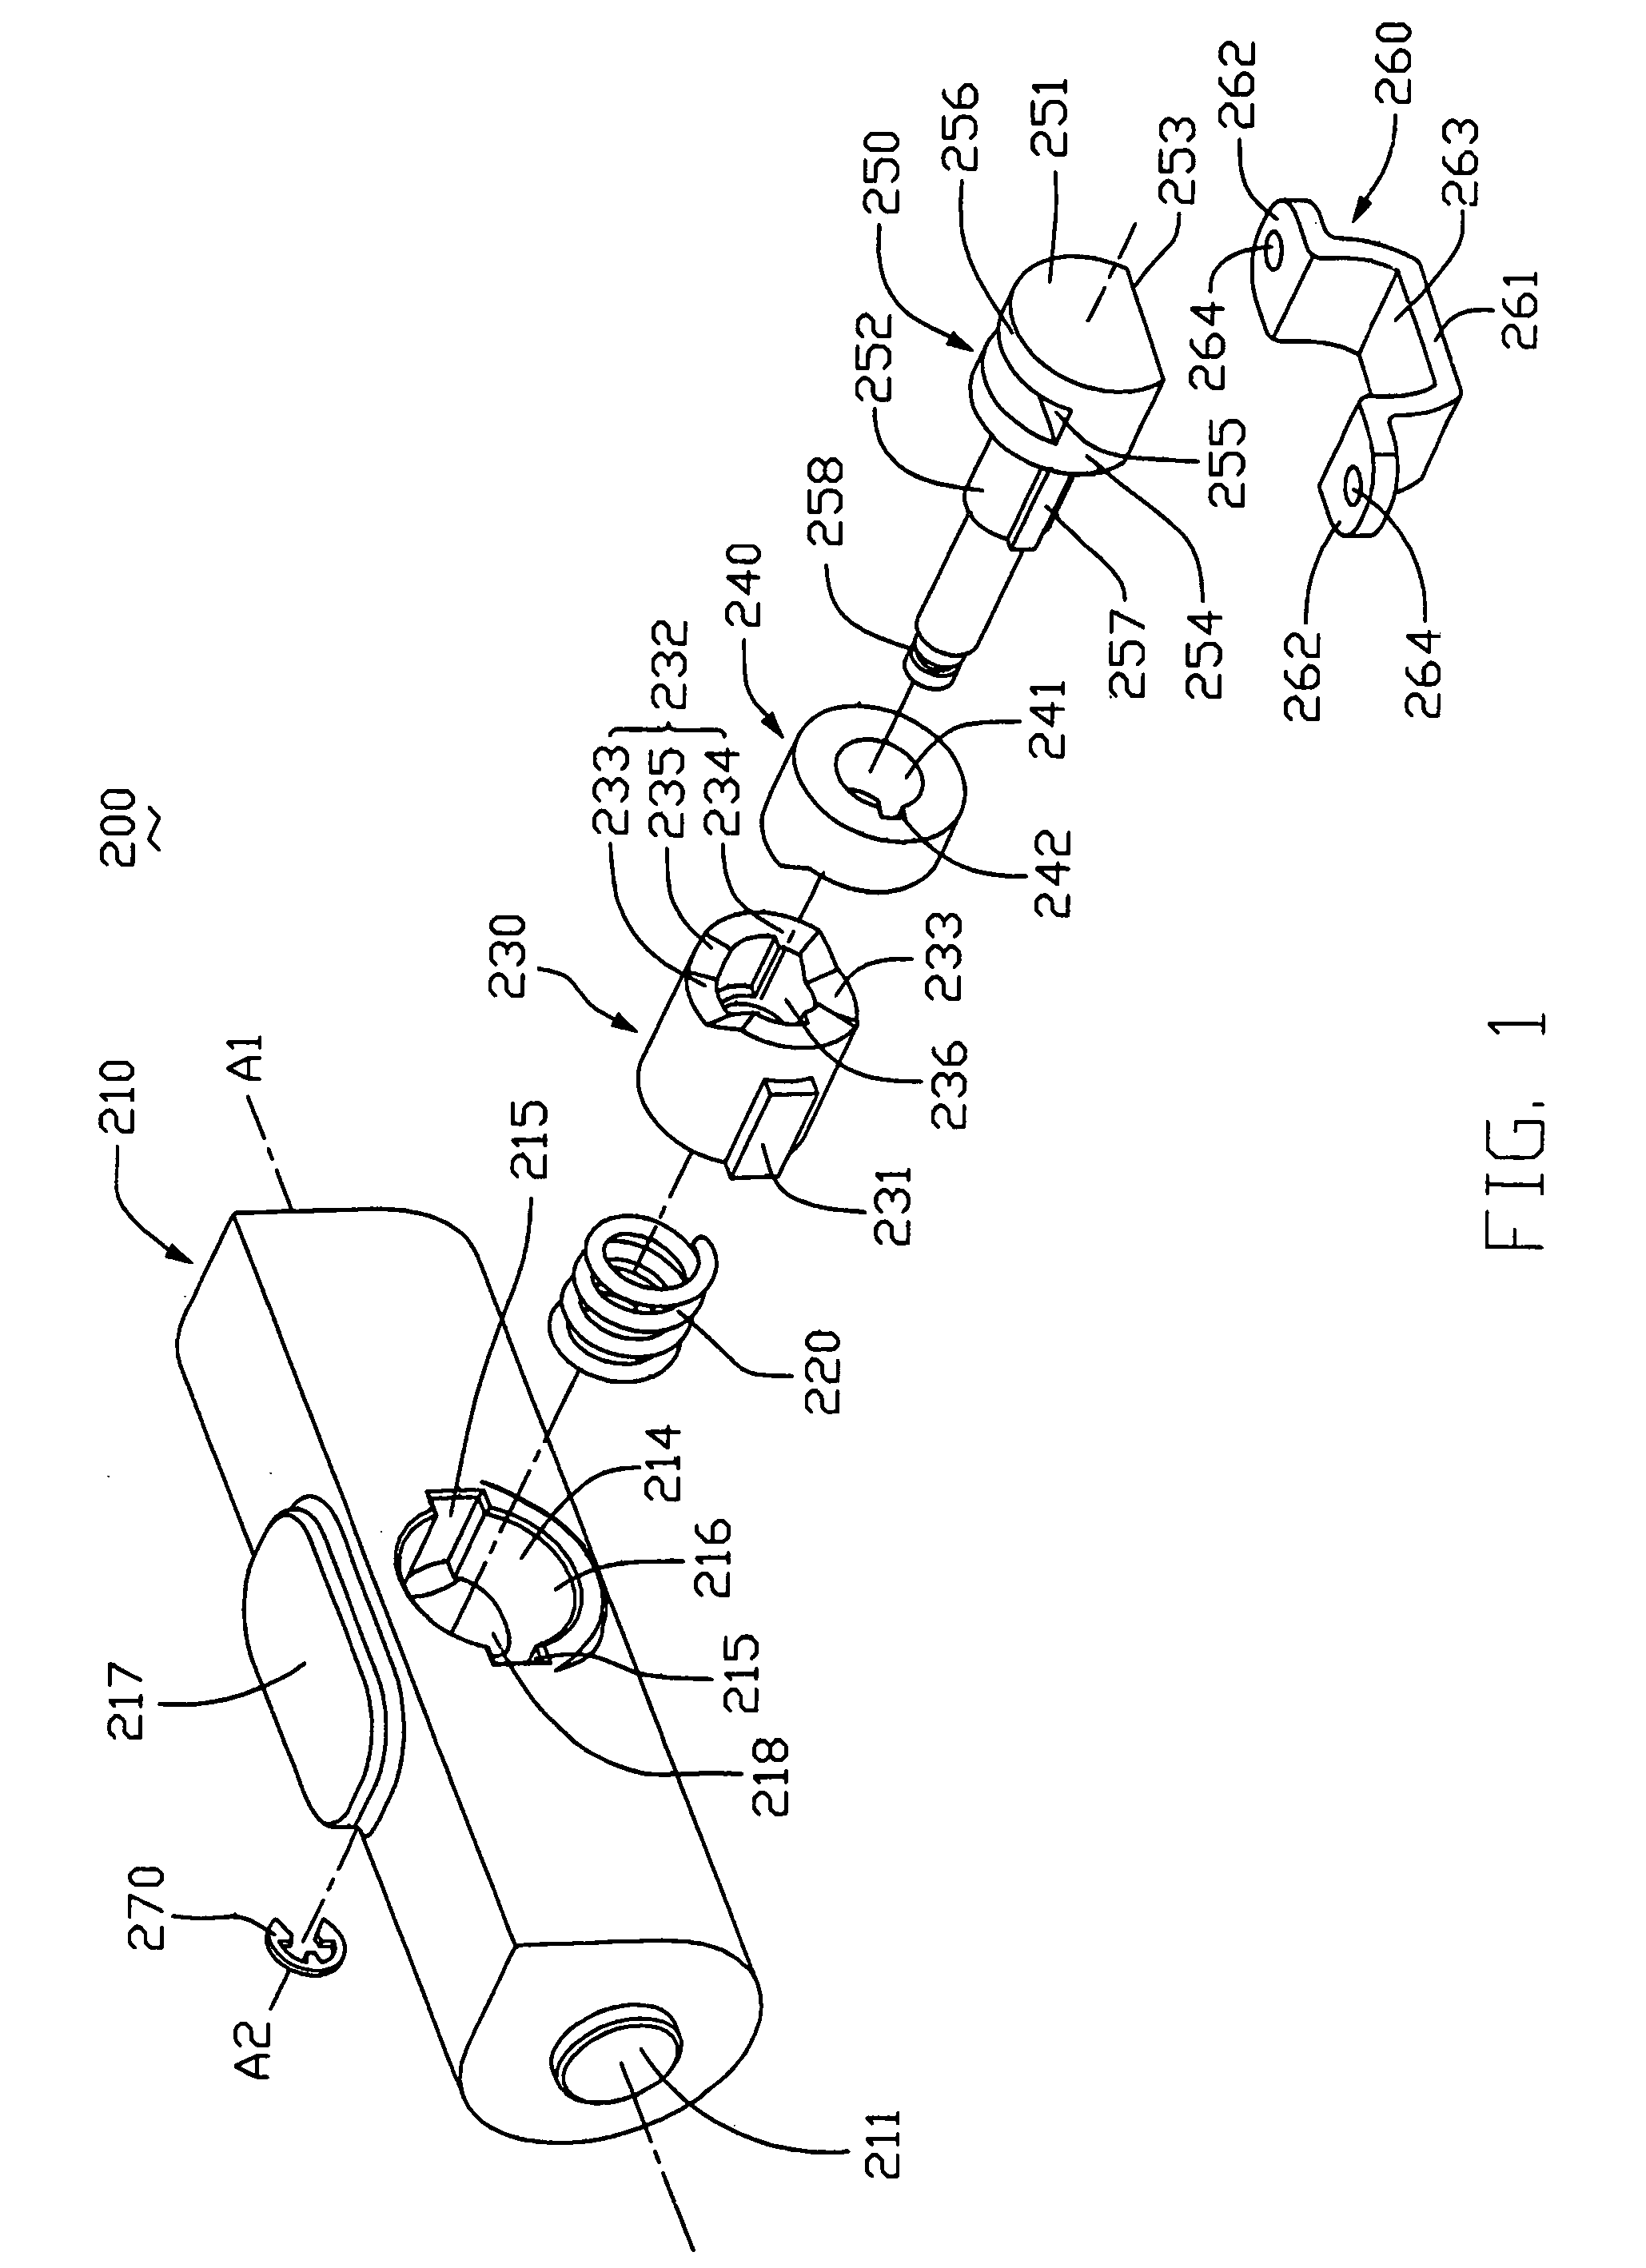 Rotary type hinge assembly for foldable electronic device